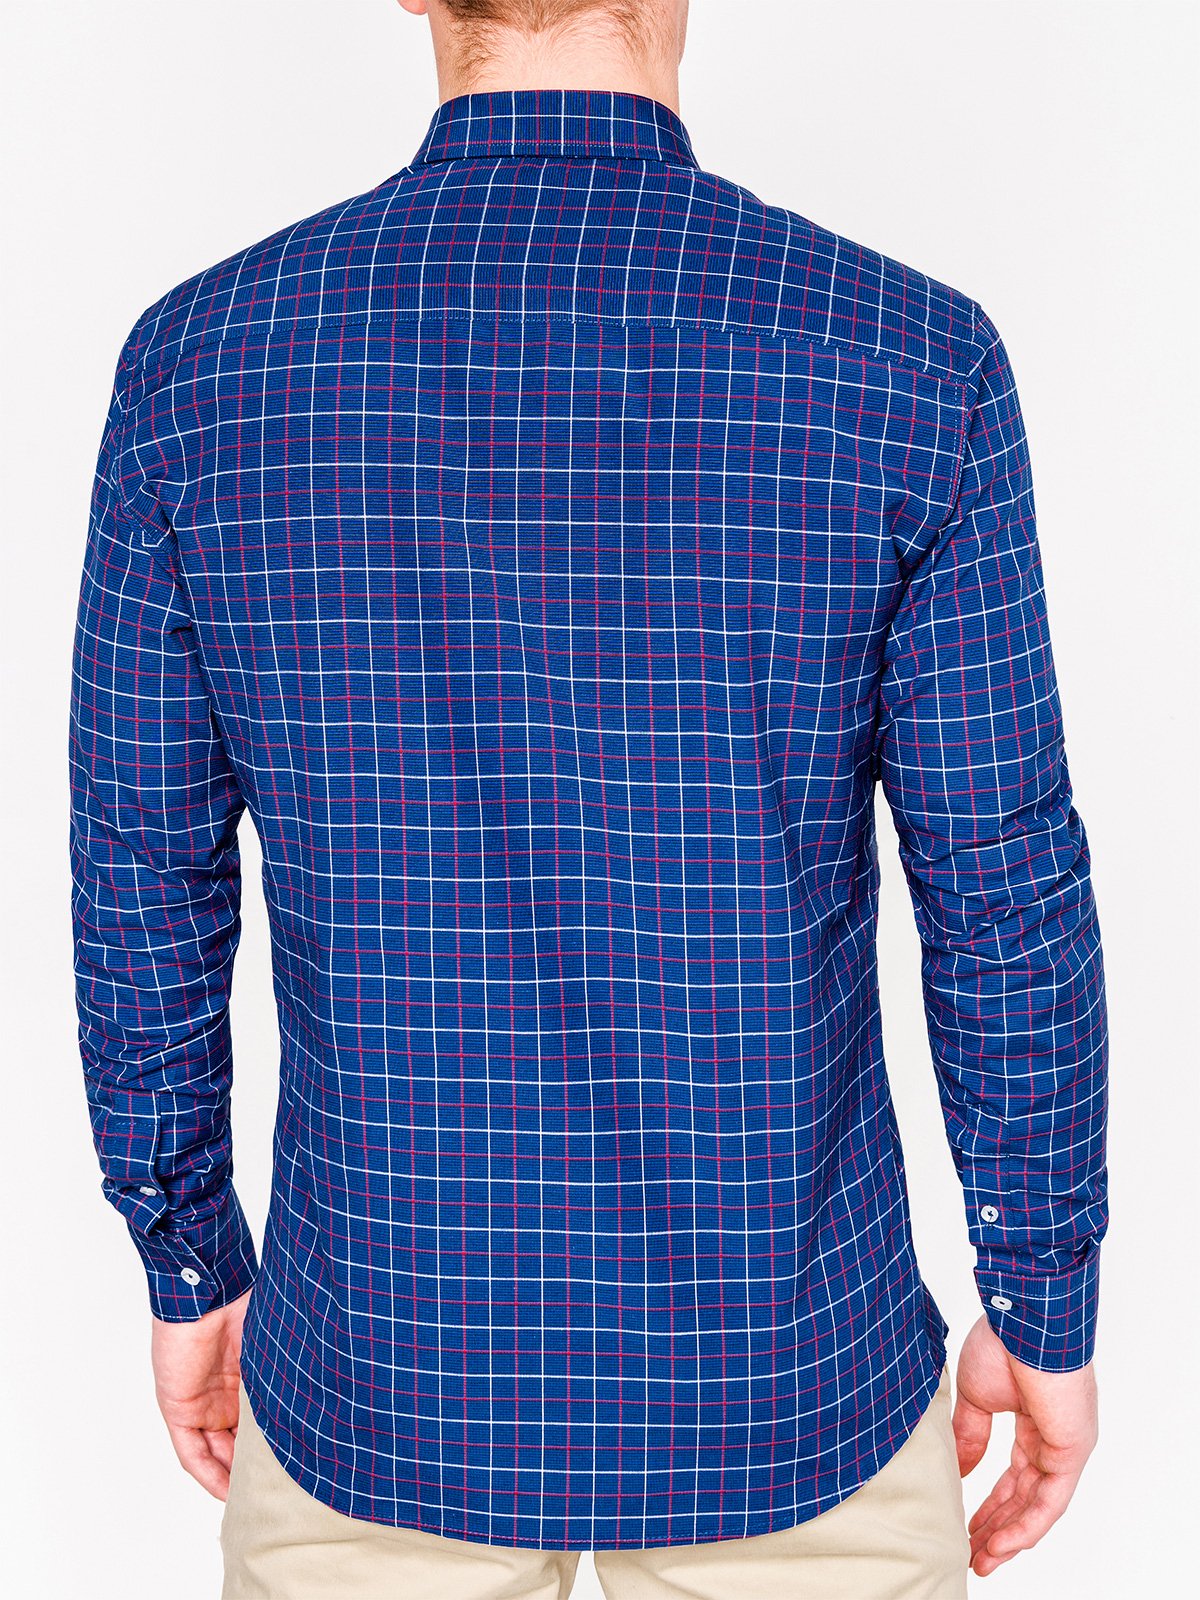 Men's check shirt with long sleeves K425 - navy | MODONE wholesale ...